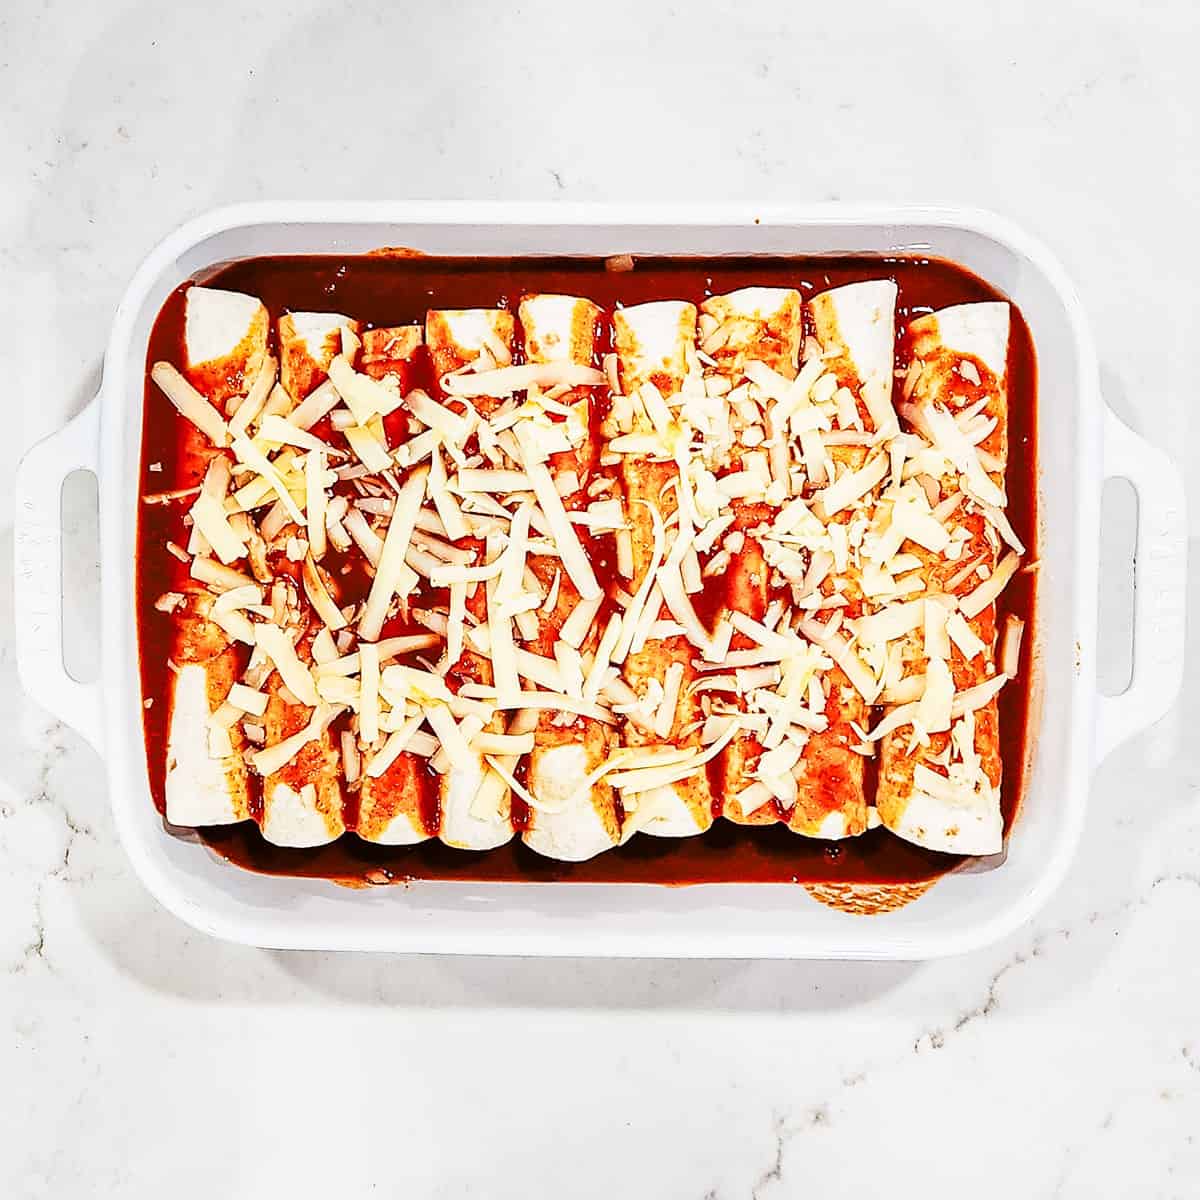 Enchiladas in a baking dish, covered in sauce and cheese, before being baked.